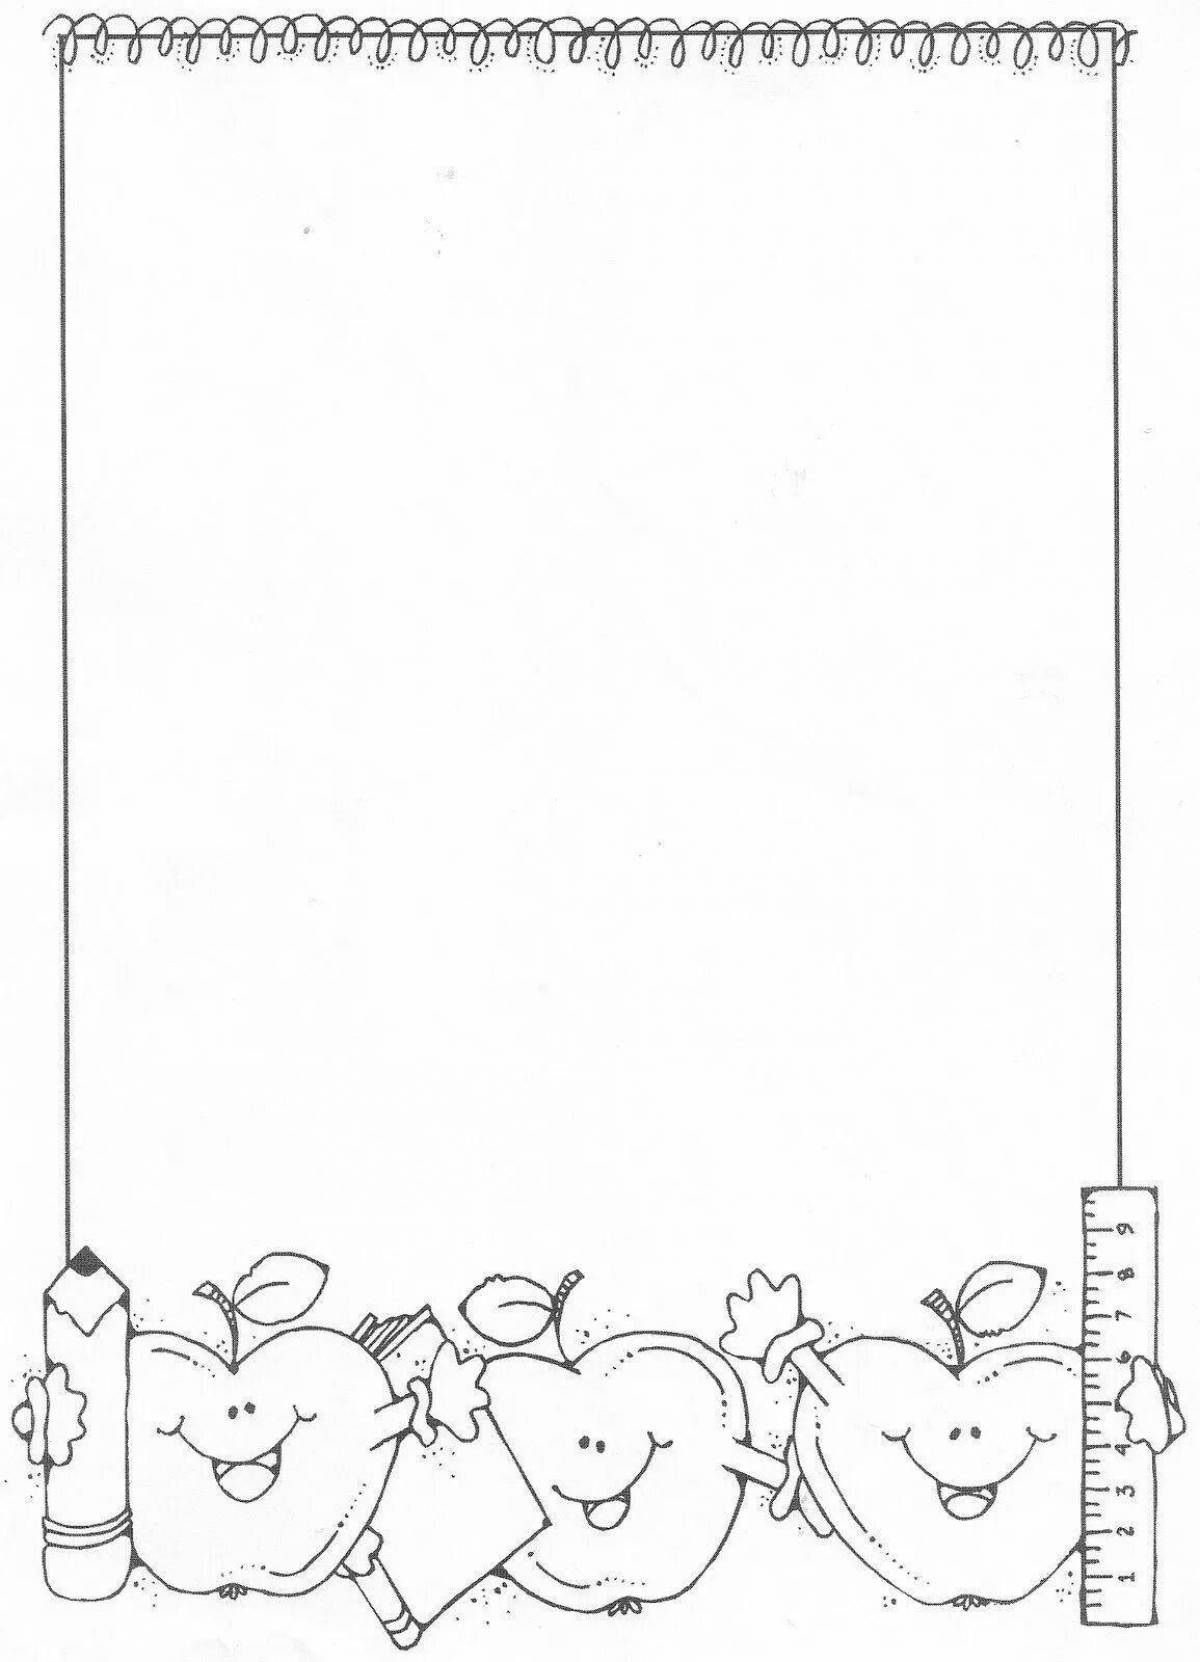 Dynamic charter coloring page